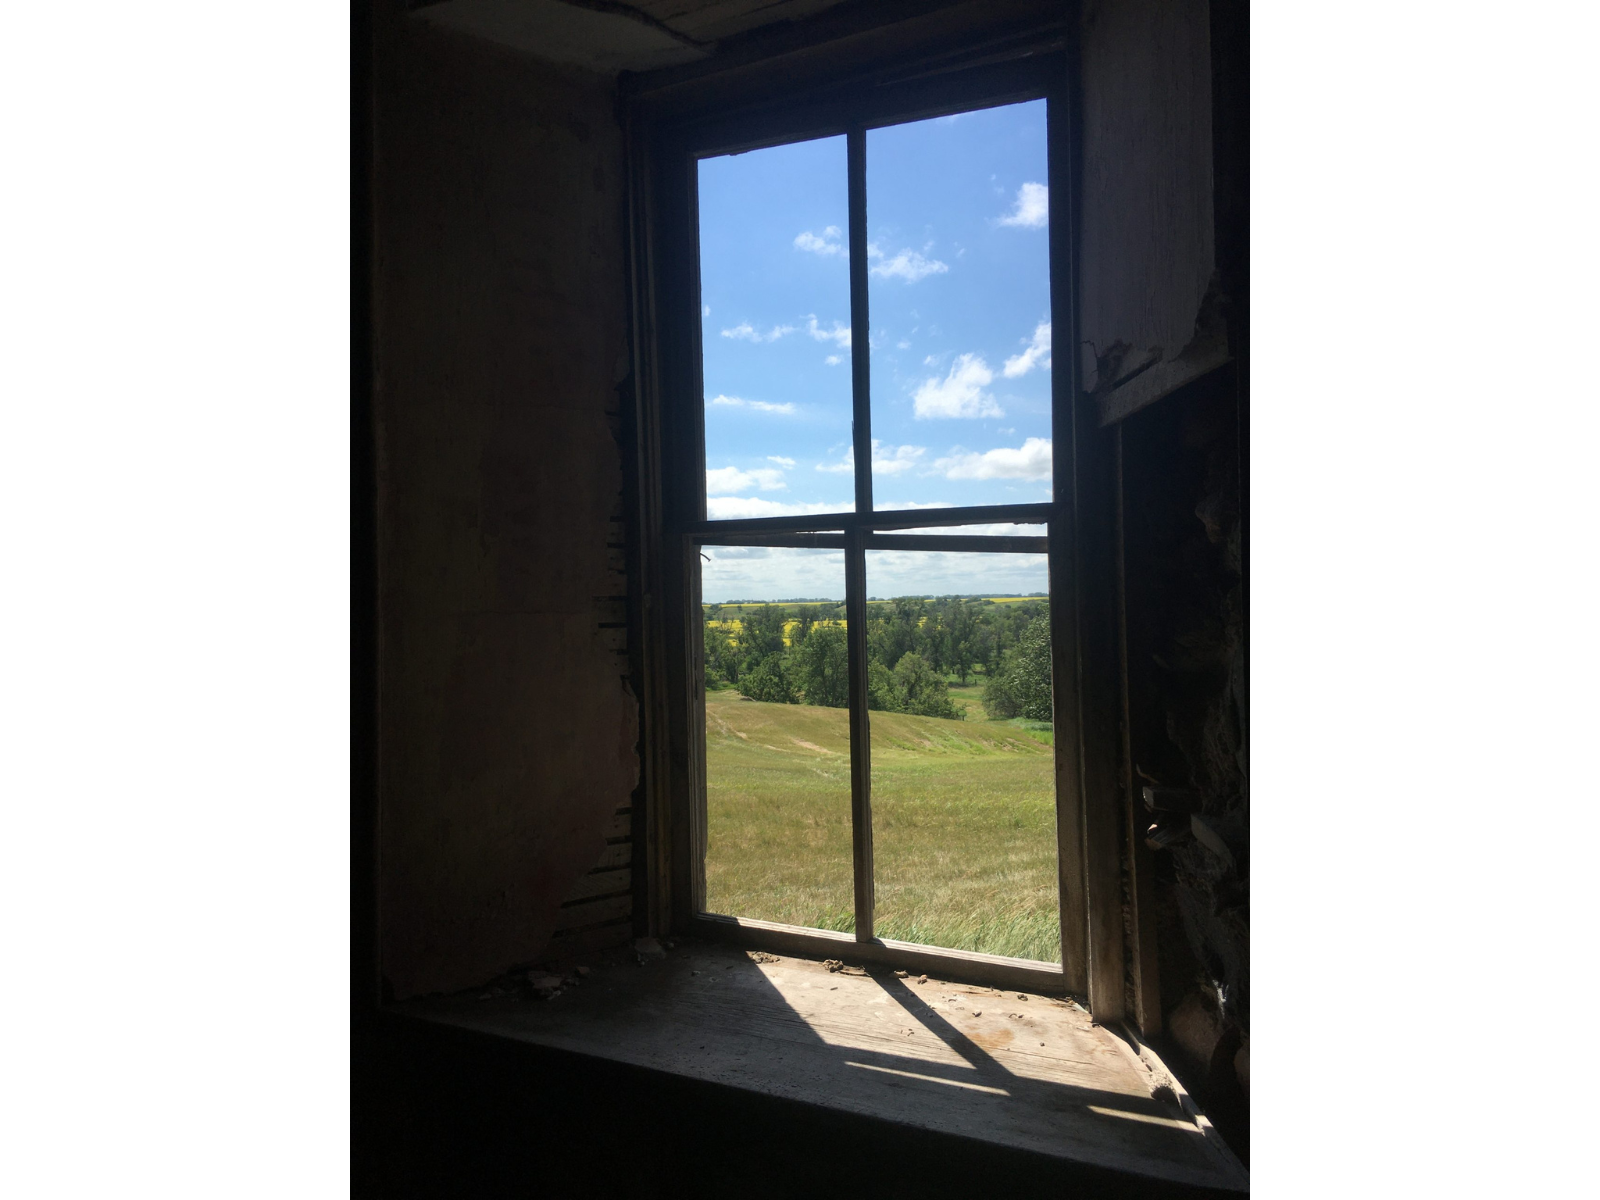 View looking out an old window, with the wooden posts framing where the panes once sat. Out the window is a view over rolling grass and green trees below a blue sky speckled with white clouds.